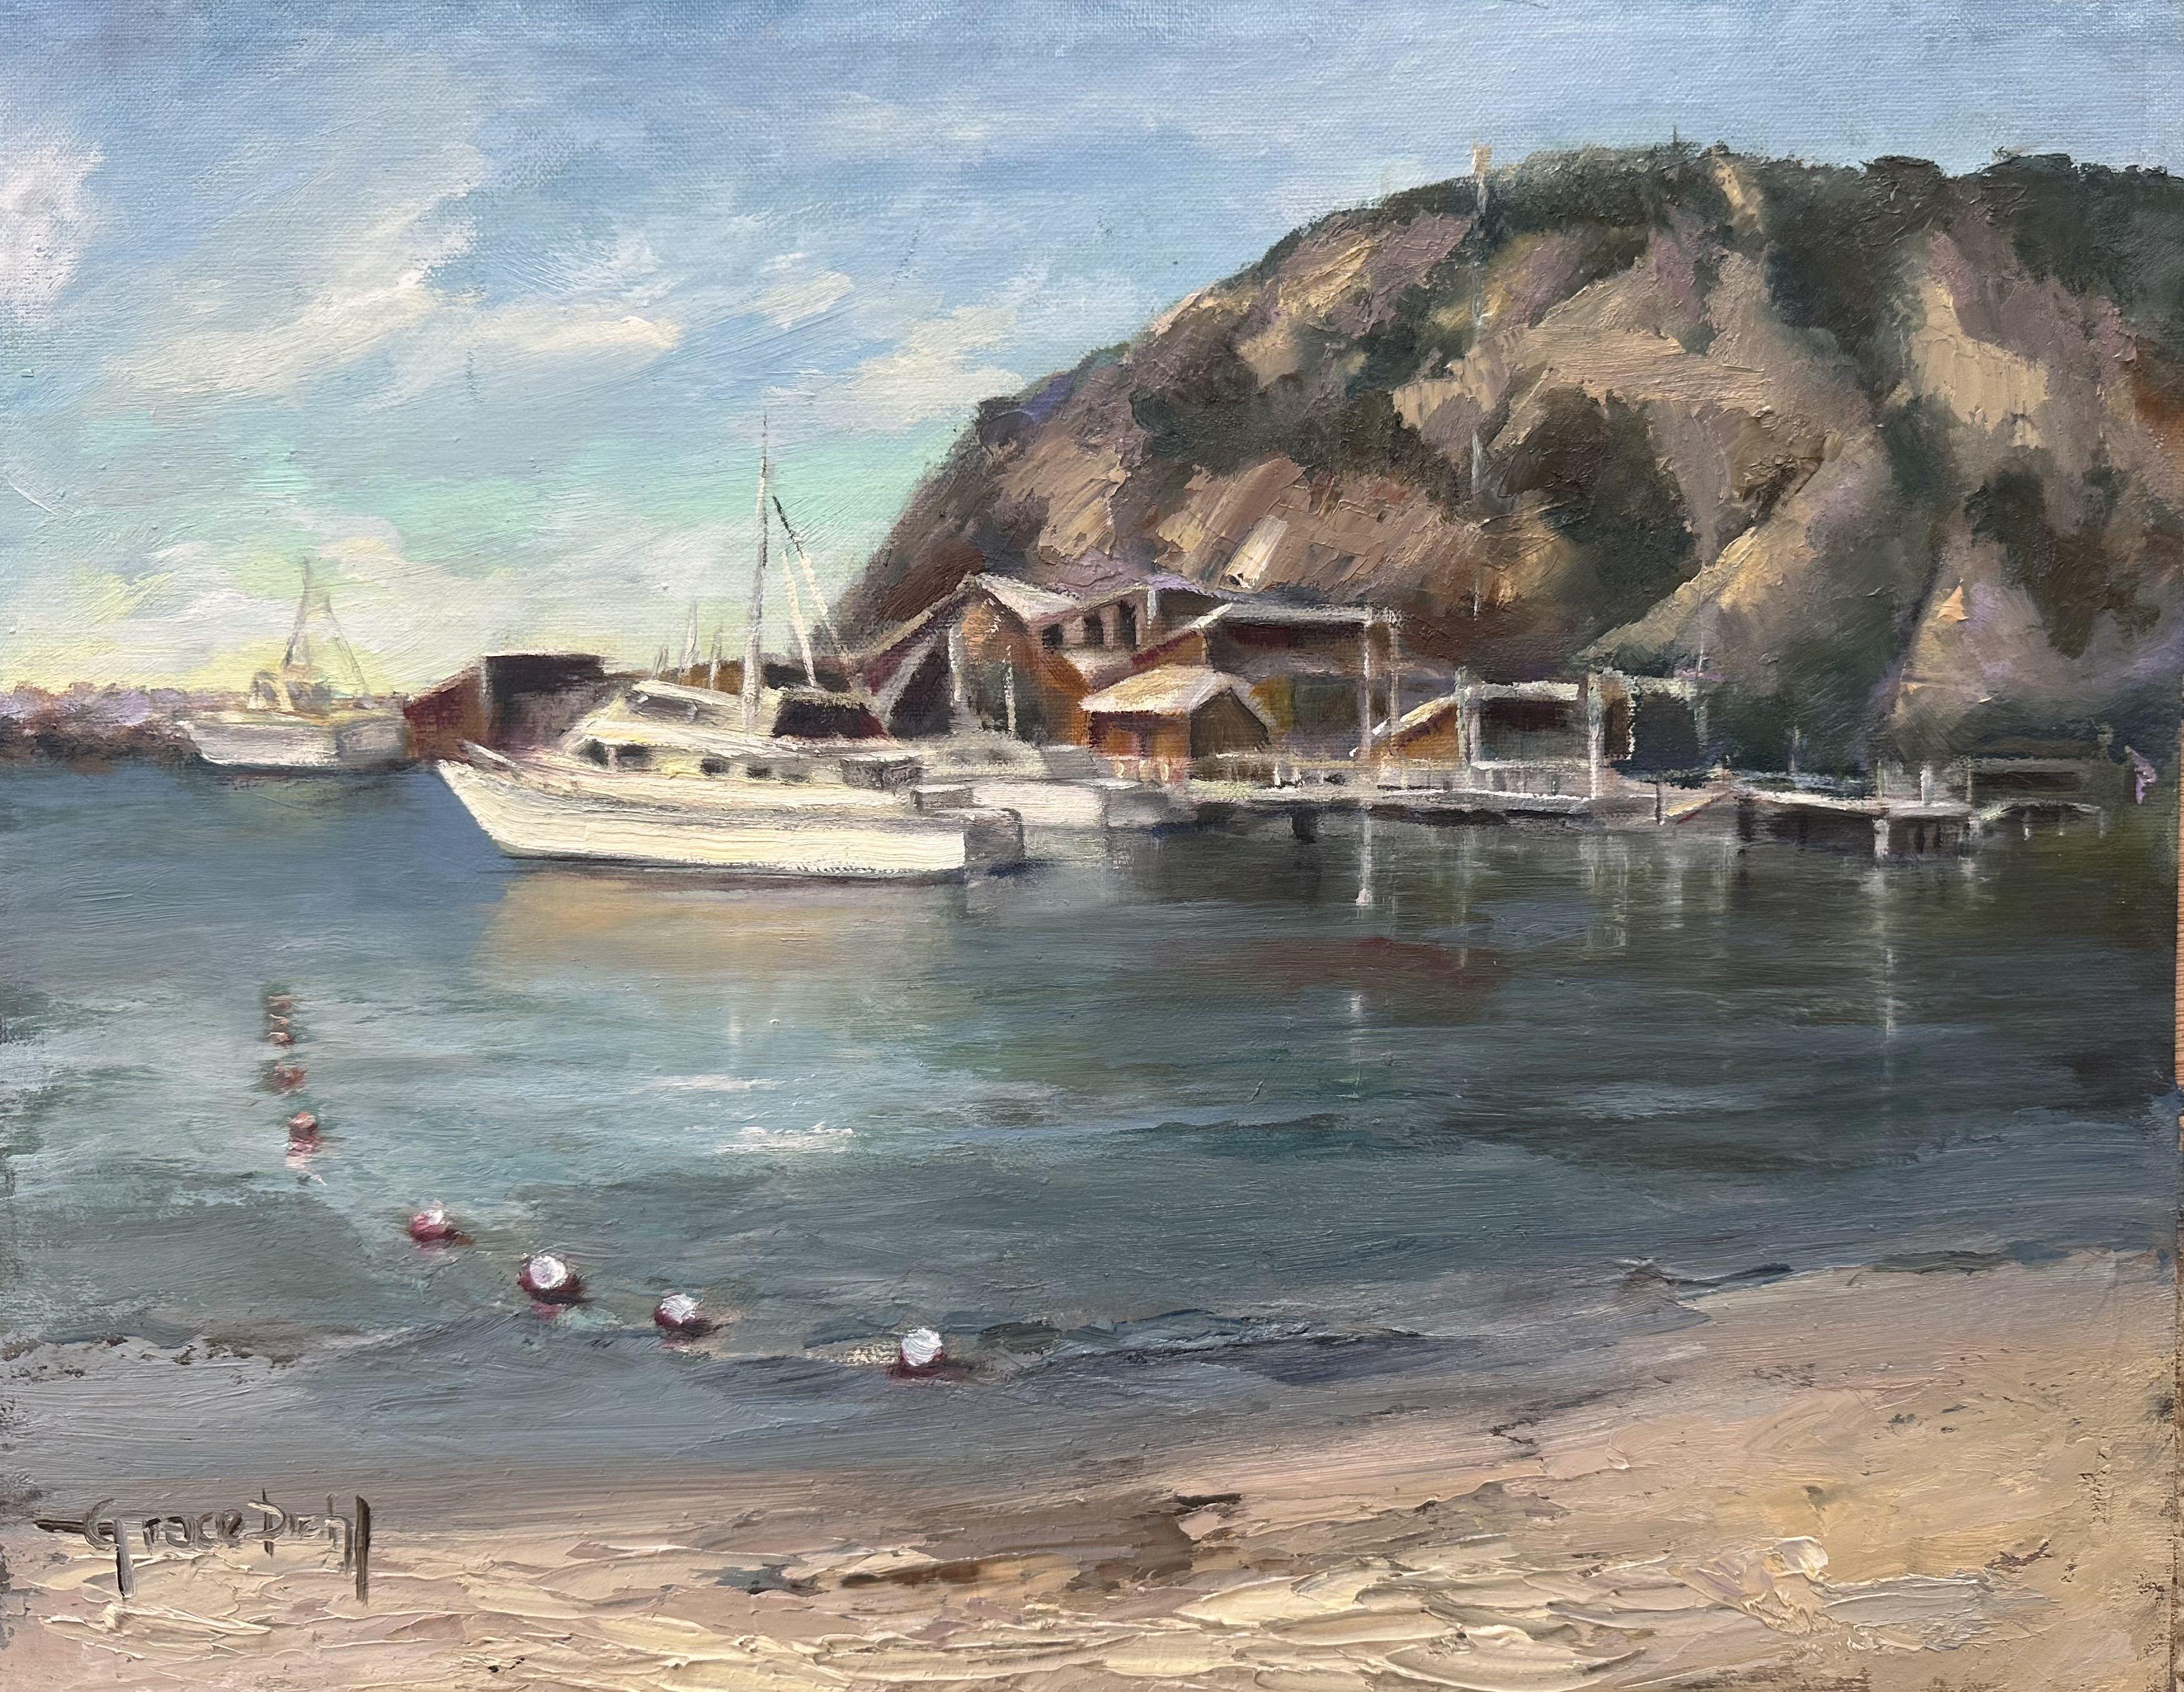 Painting at the beach can be a very enjoyable and relaxing experience, especially on a warm day. The sounds of the waves and the salt air can be invigorating and help to clear the mind. It's great to have a favorite spot where you can return to